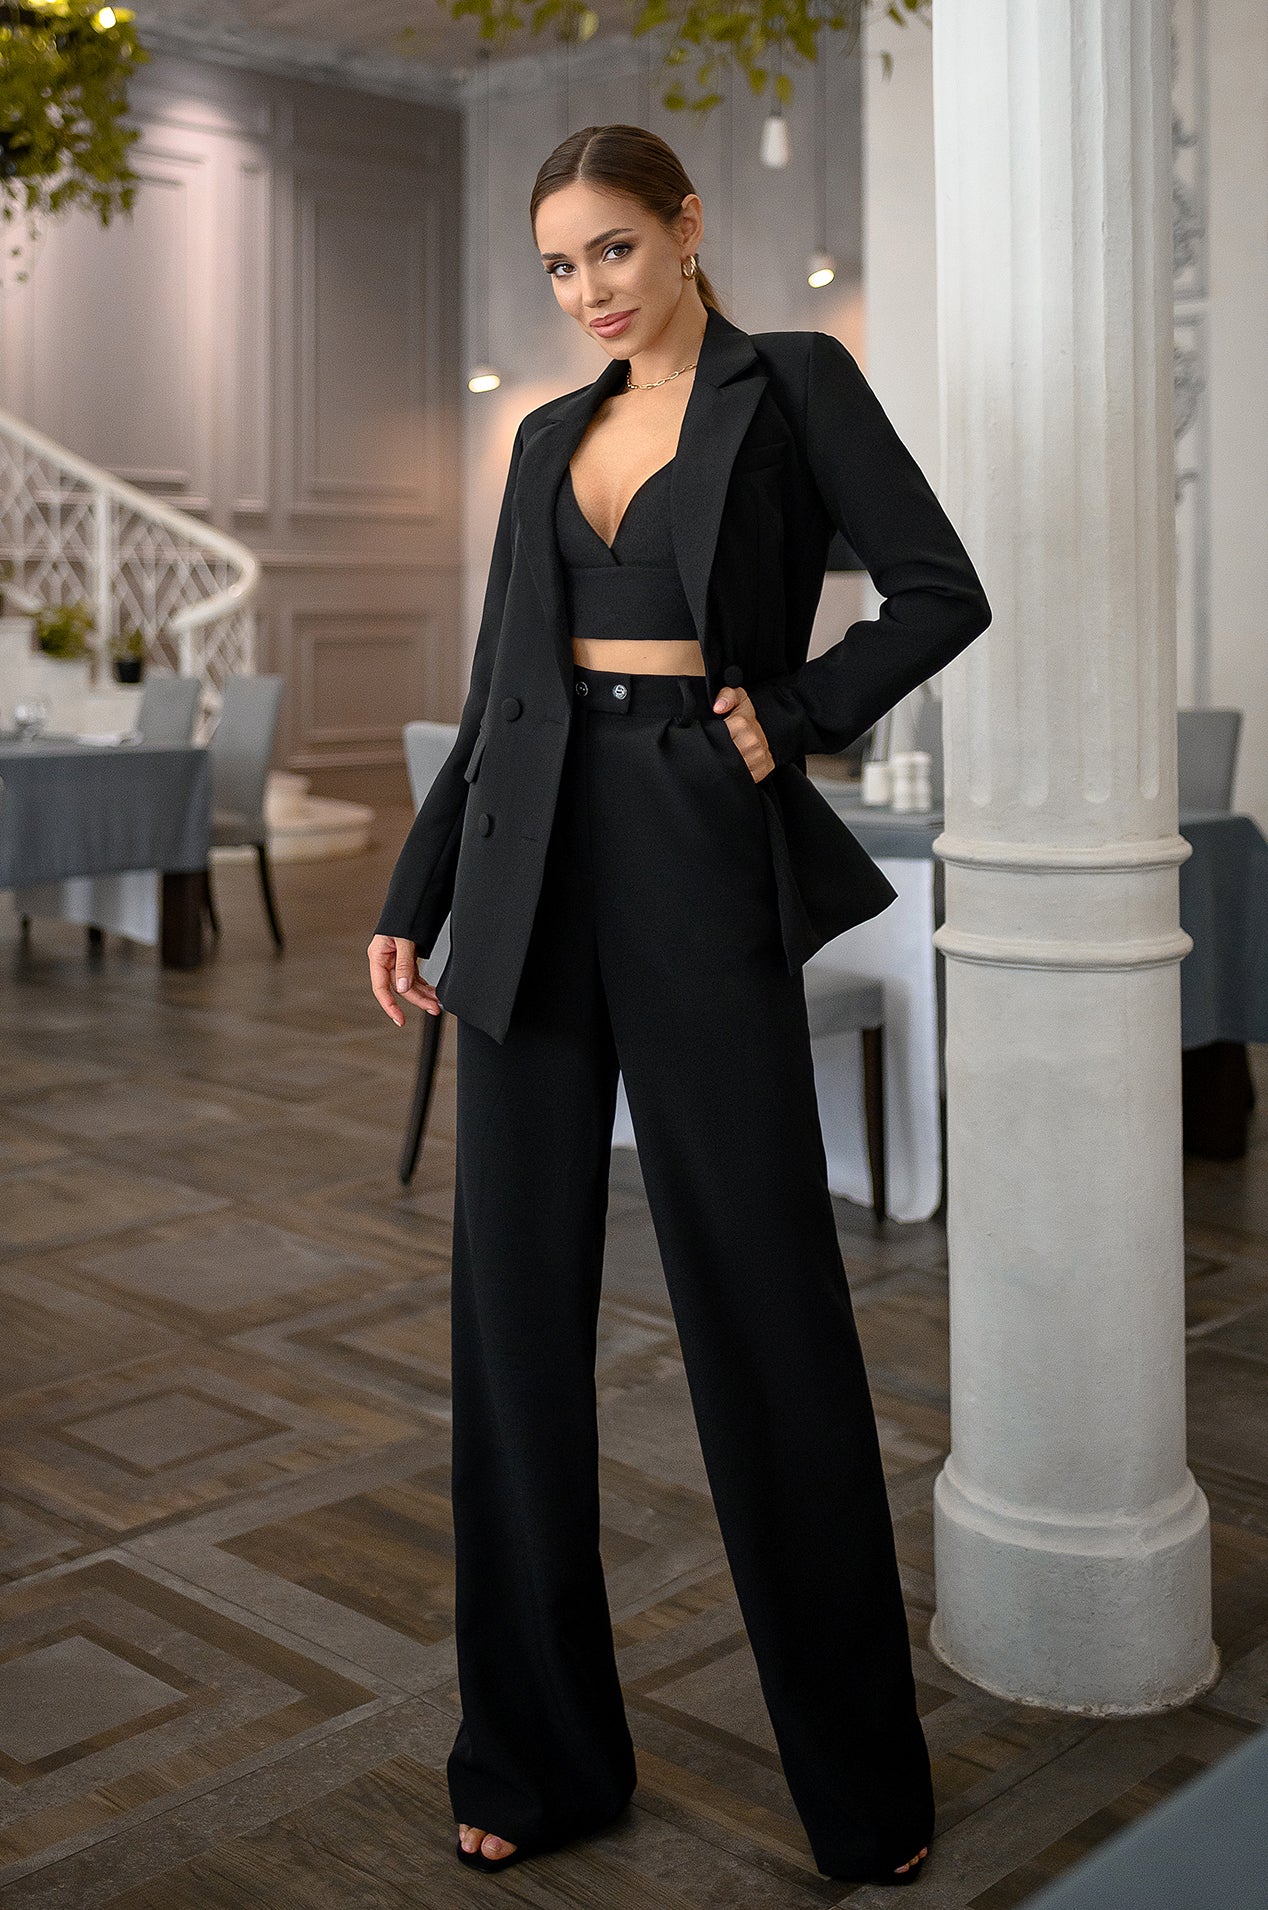 Black Double Breasted Suit 3-Piece